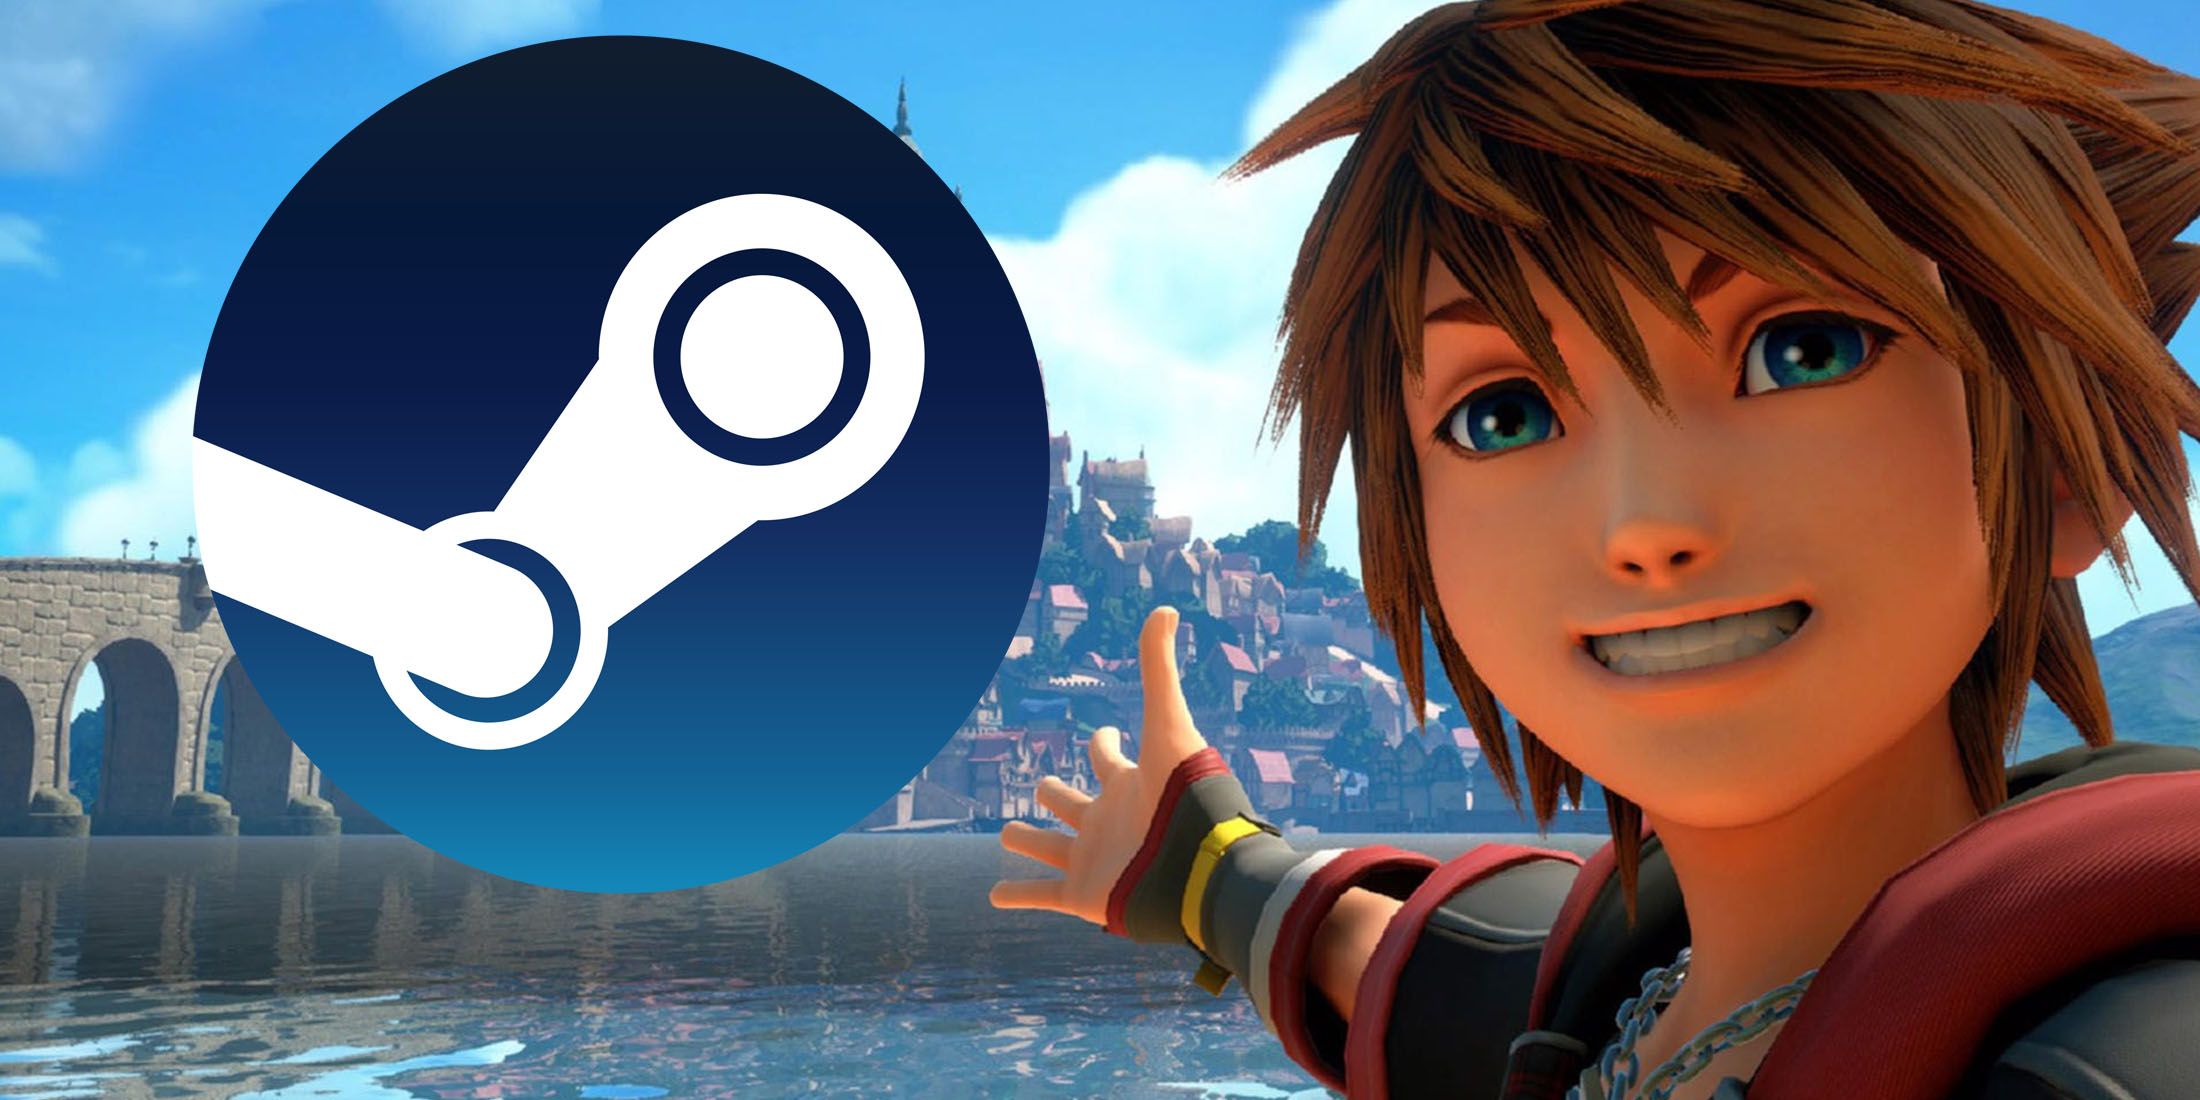 A screenshot of Sora from Kingdom Hearts 3 geasturing toward the Steam logo in the middle of an island city.